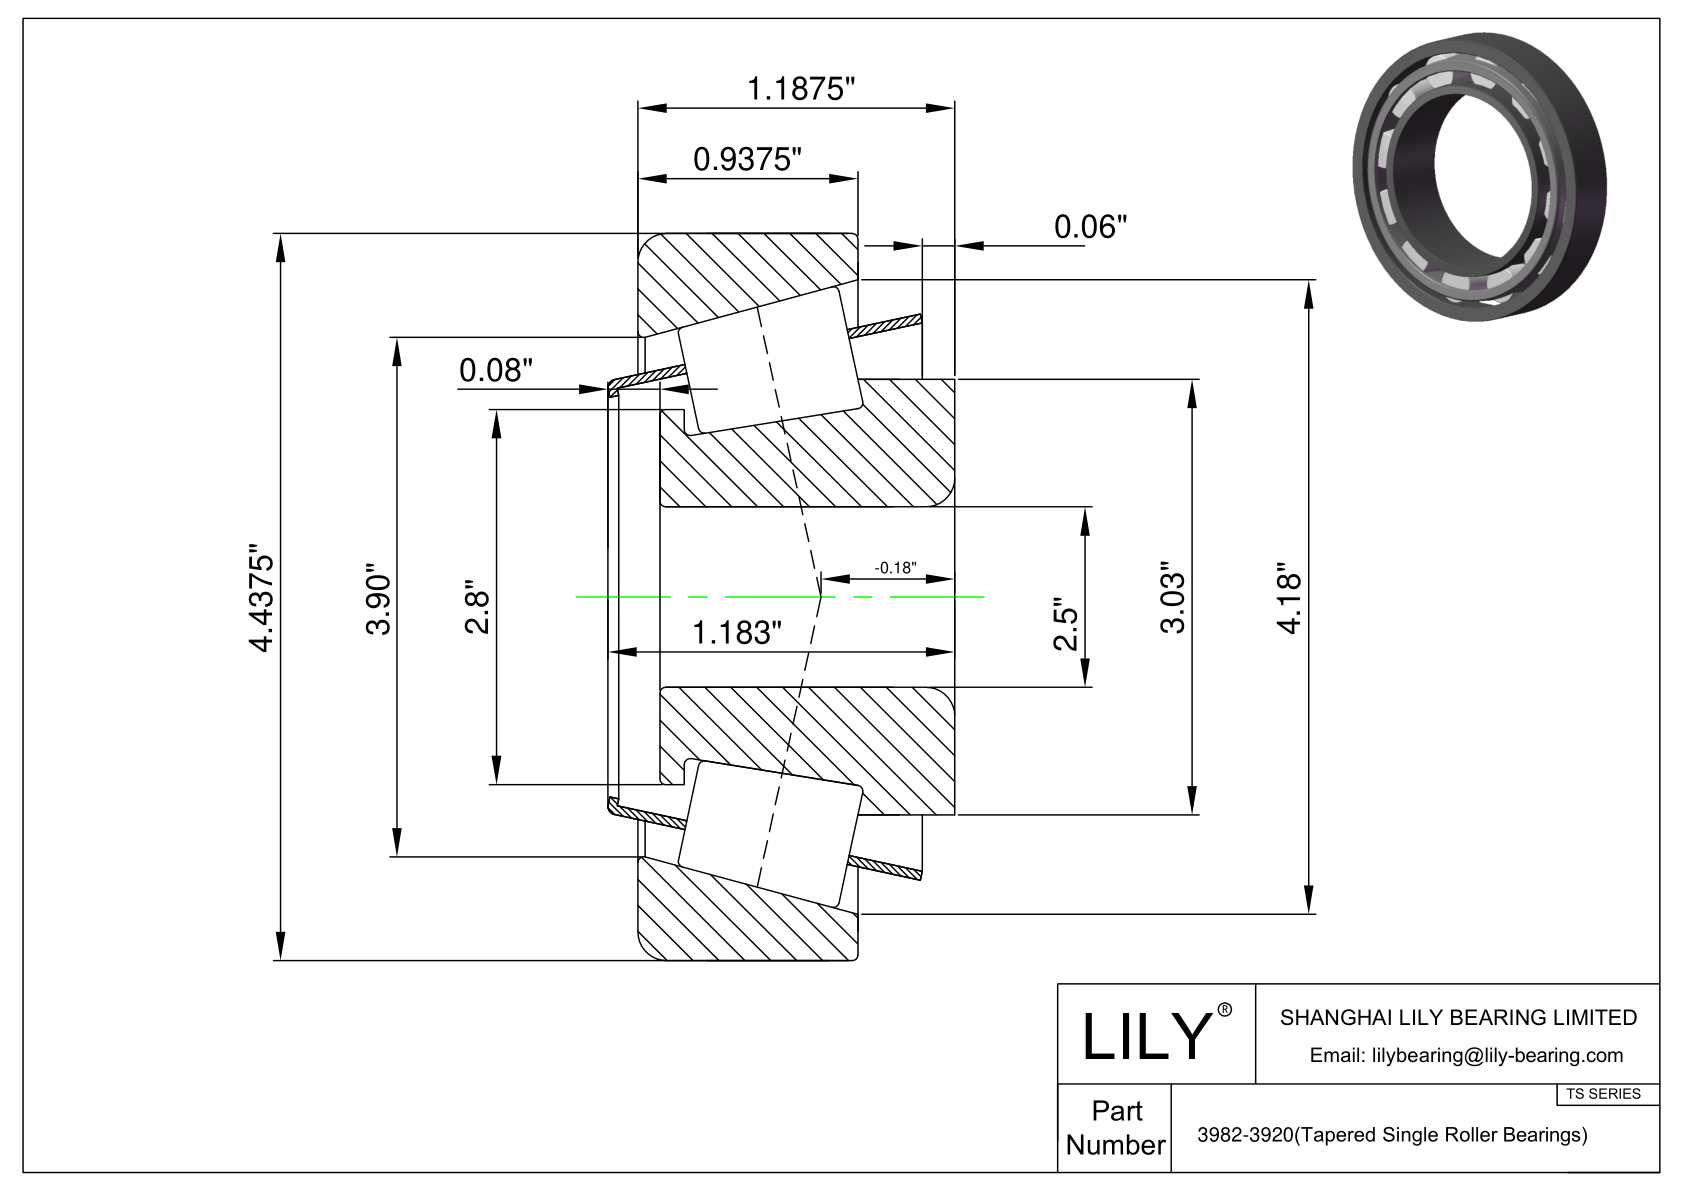 3982-3920 TS (Tapered Single Roller Bearings) (Imperial) cad drawing